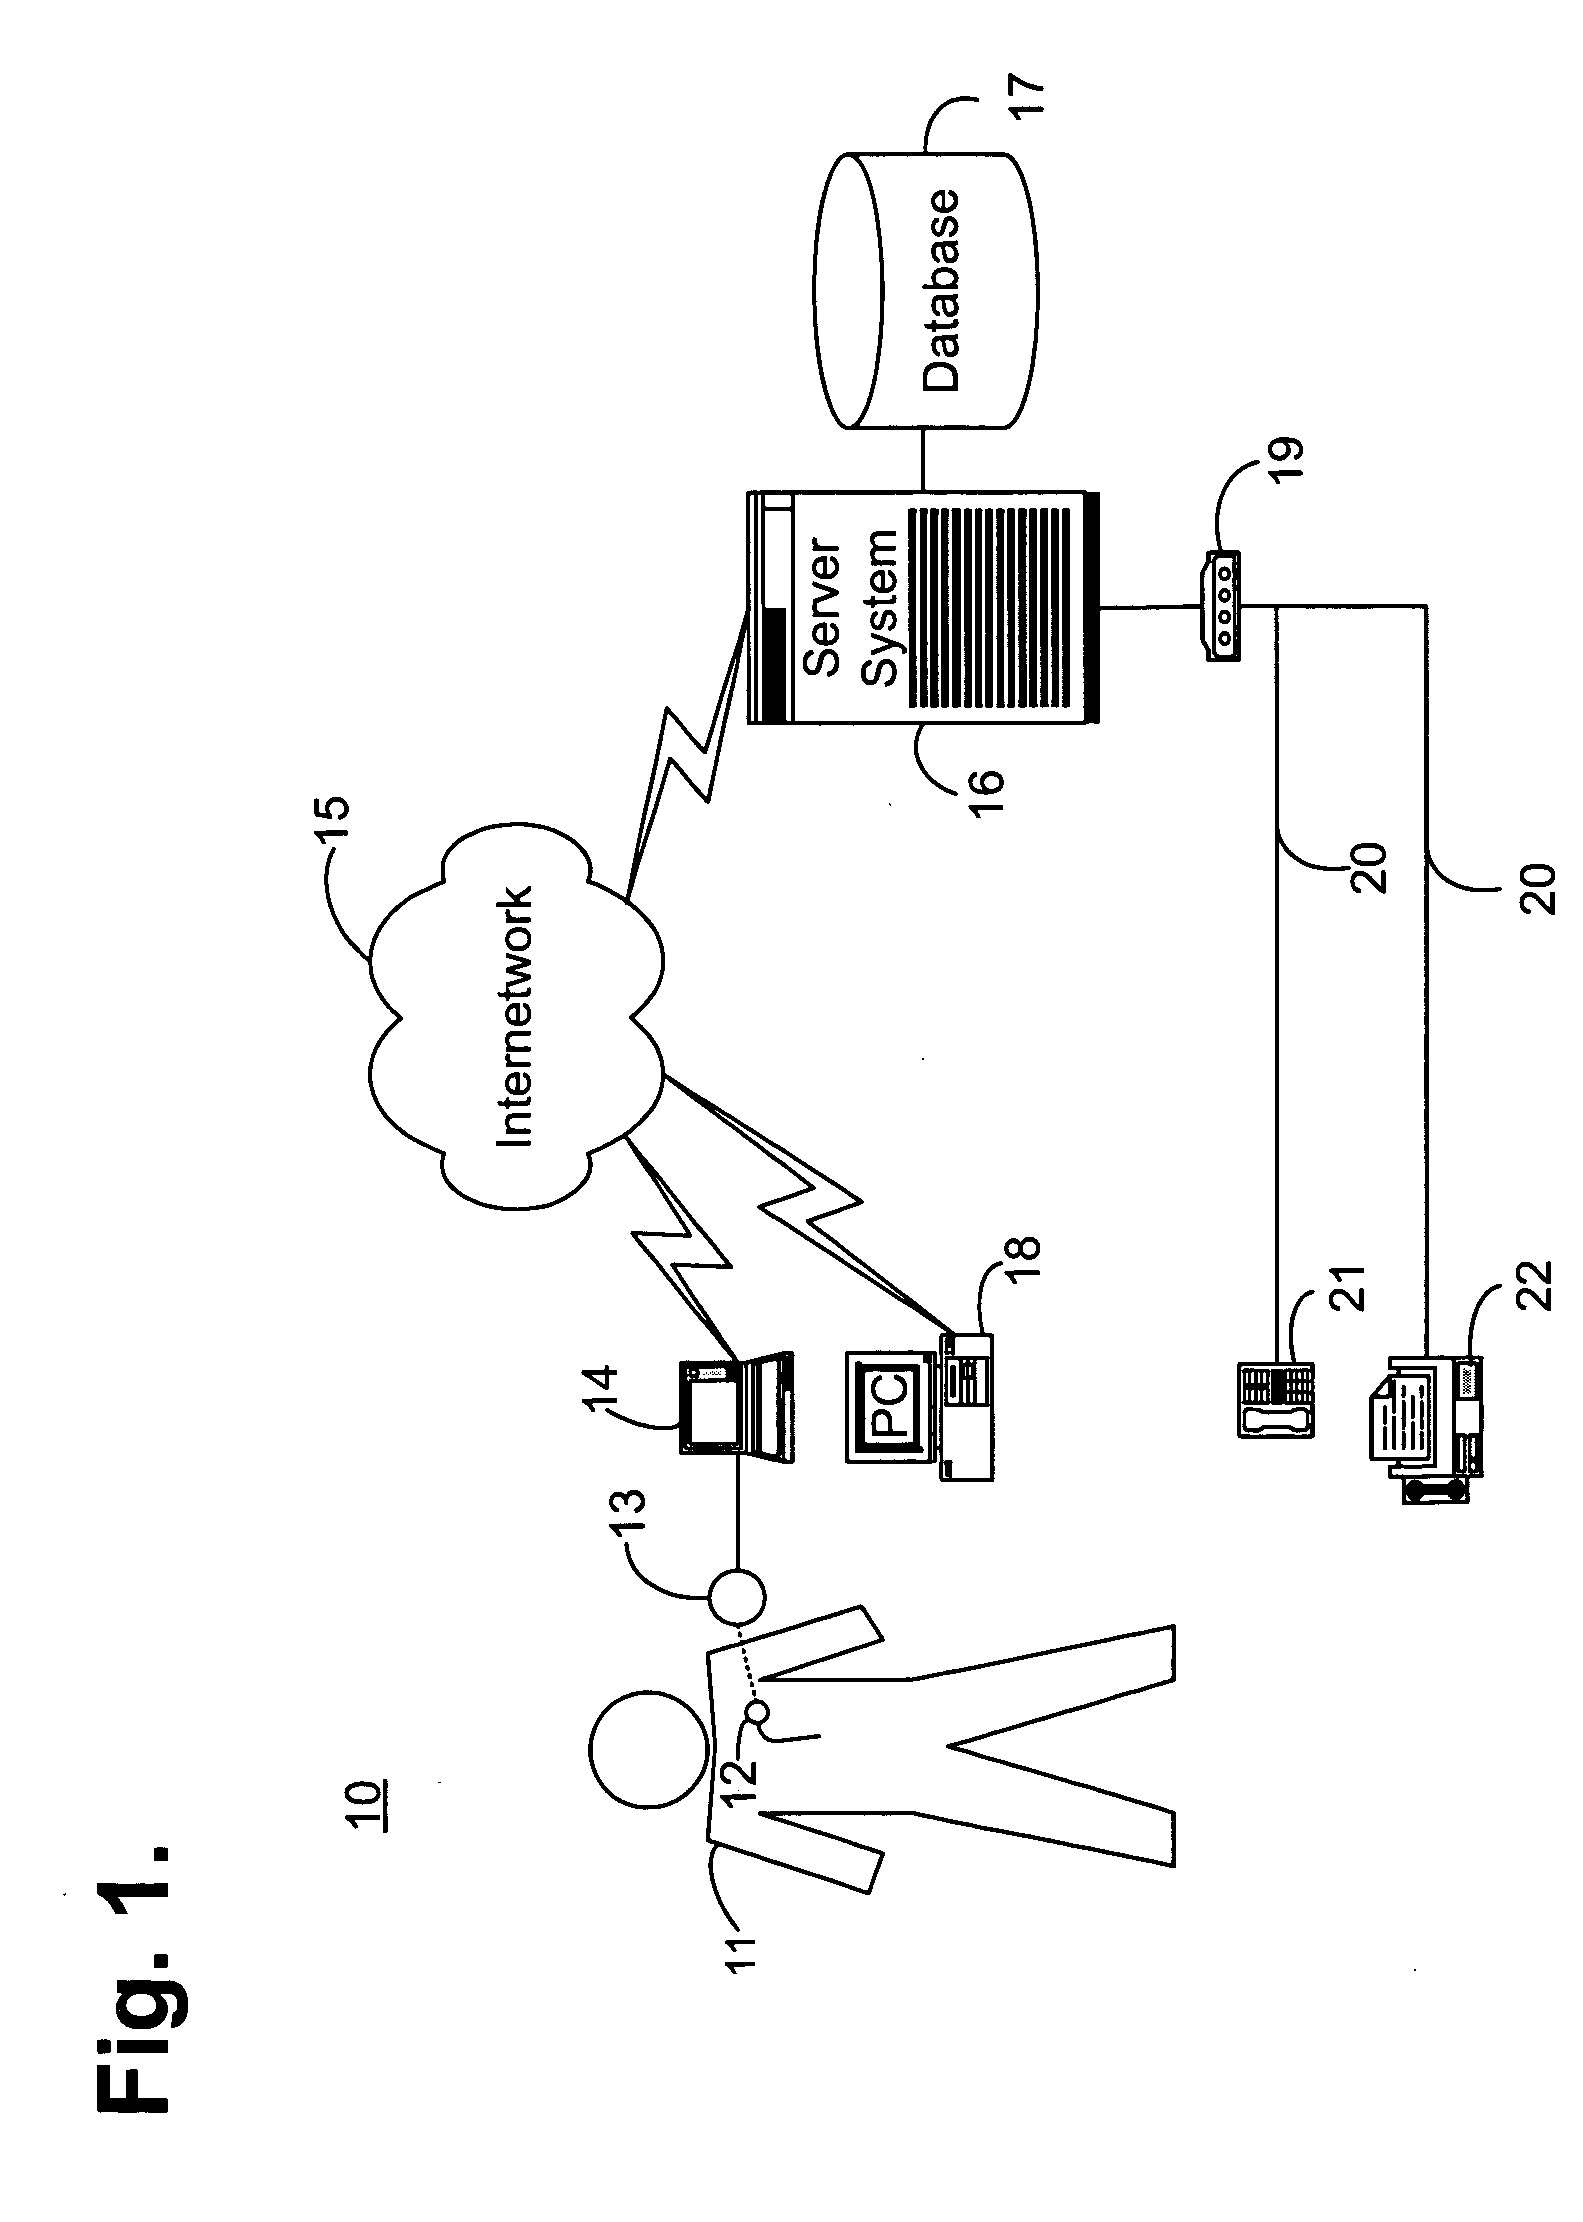 System and method for providing voice feedback for automated remote patient care